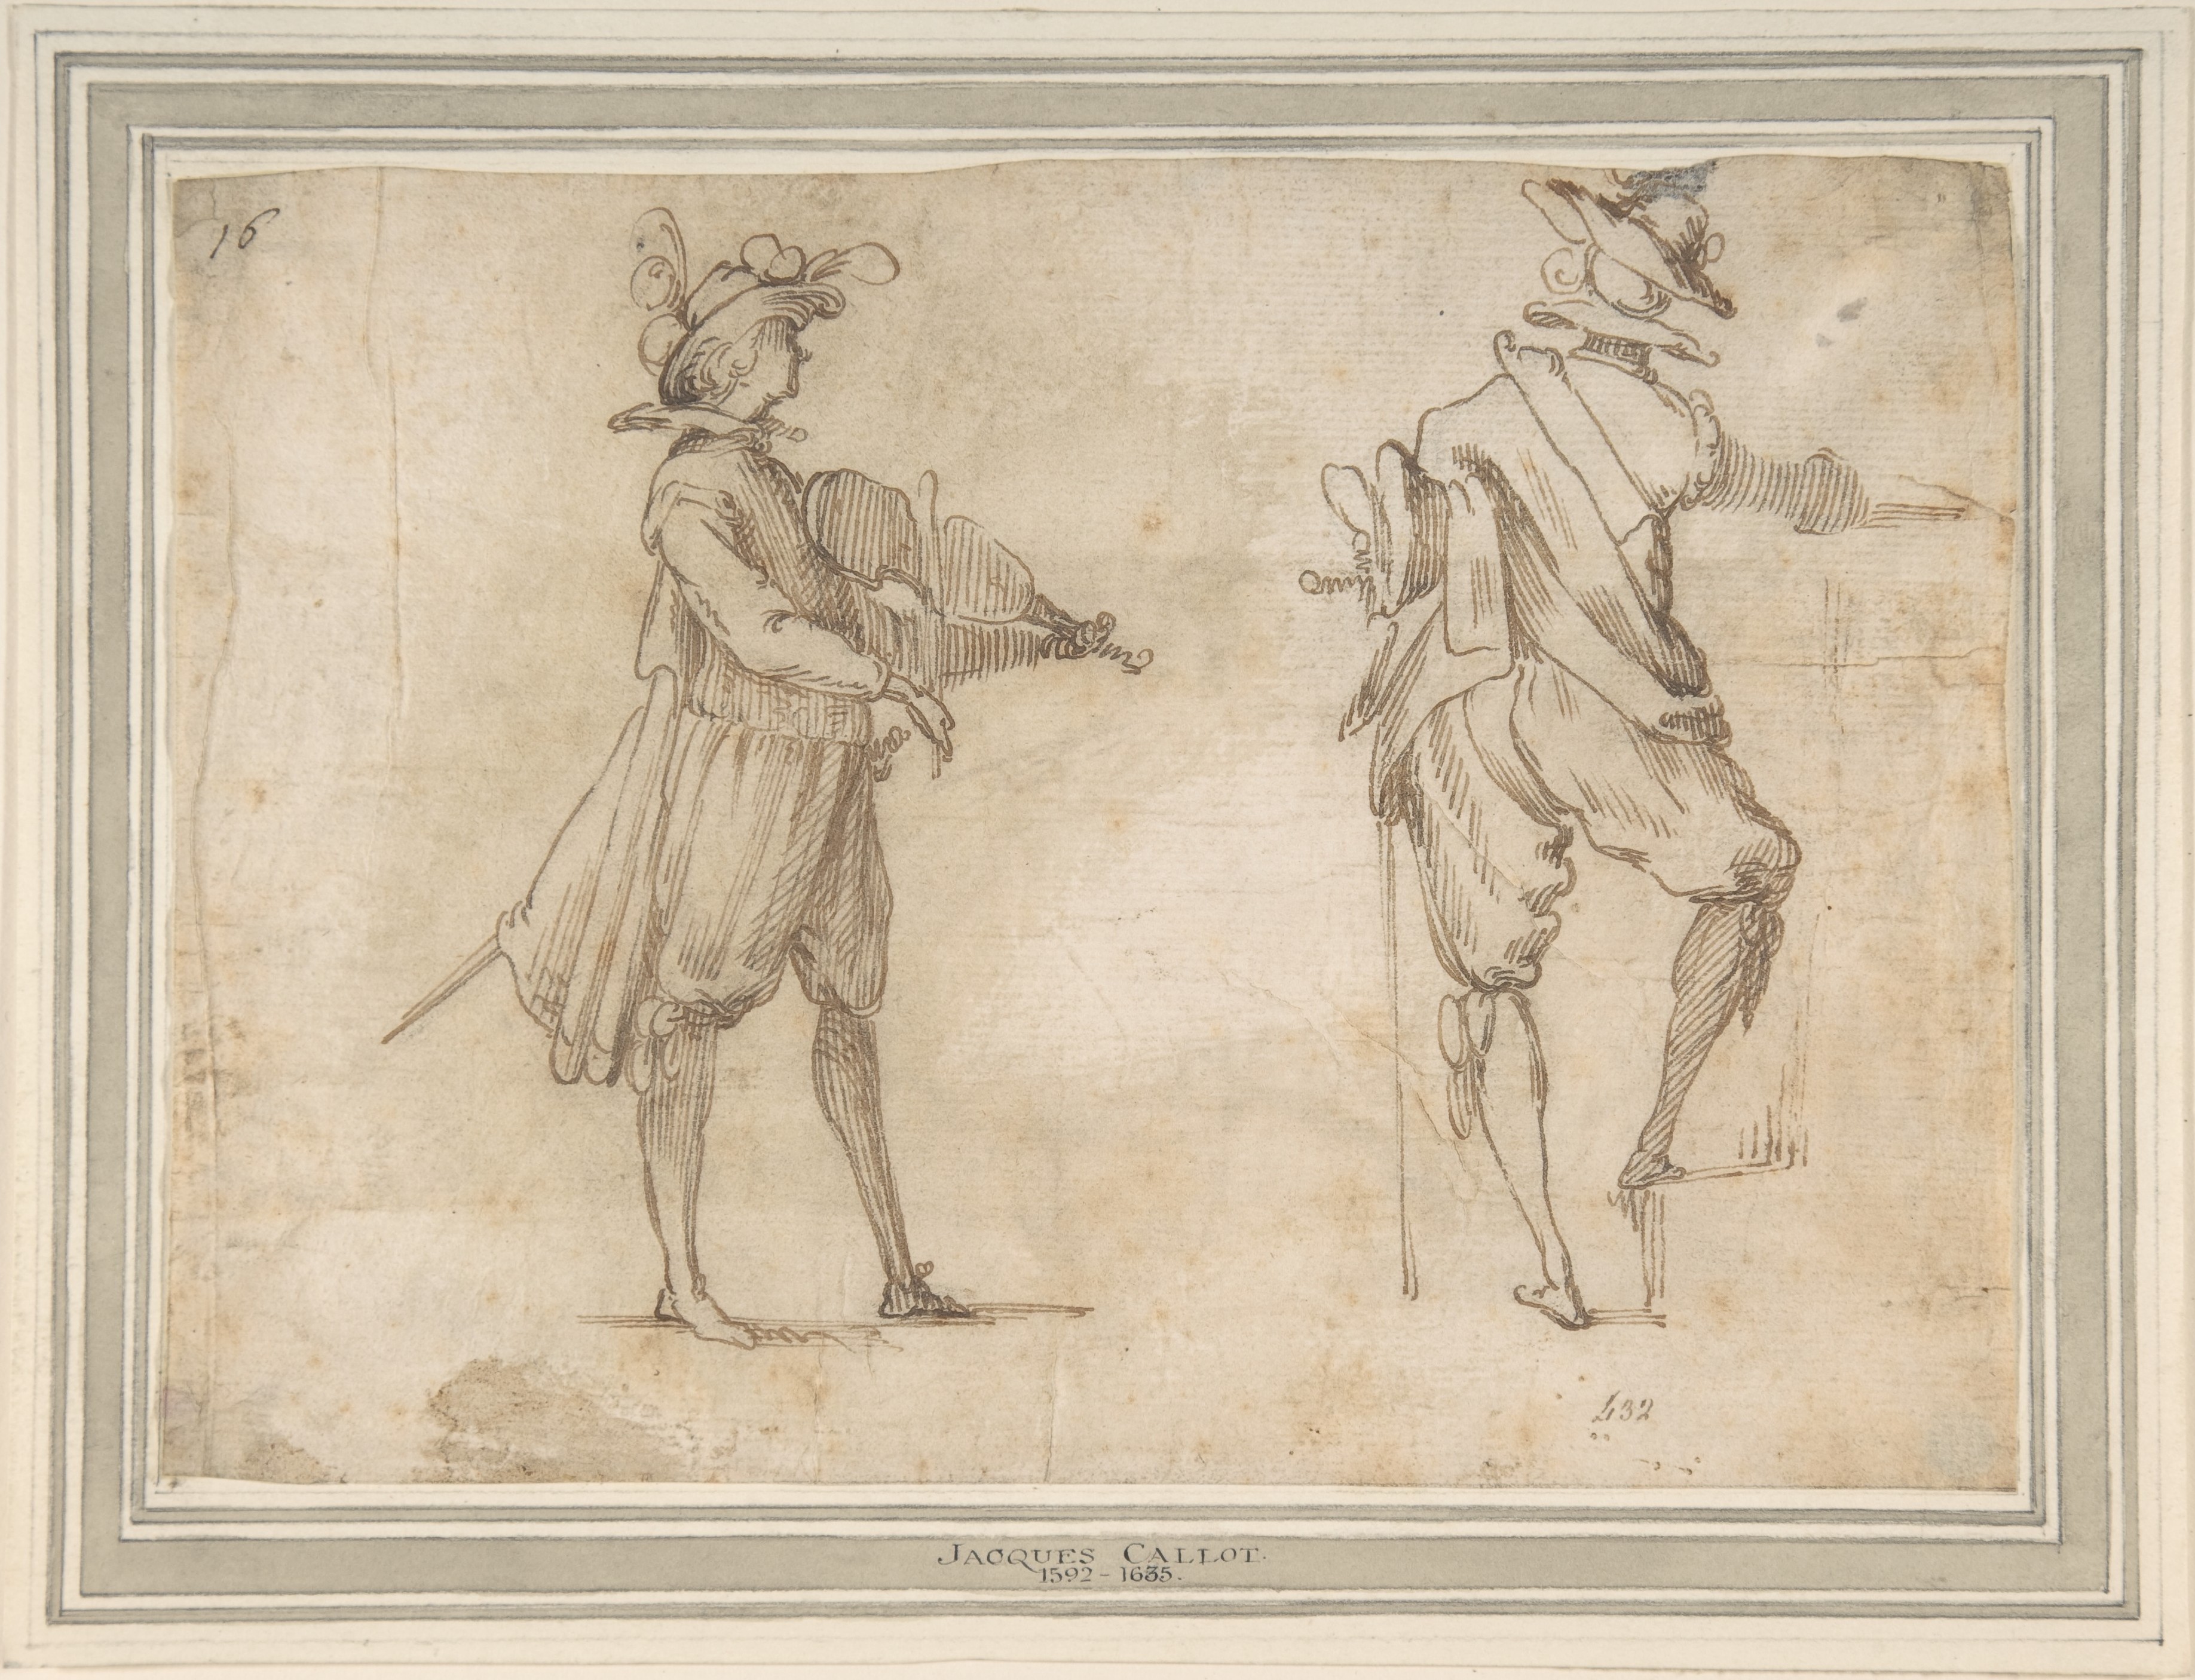 Jacques Callot Artworks collected in Metmuseum